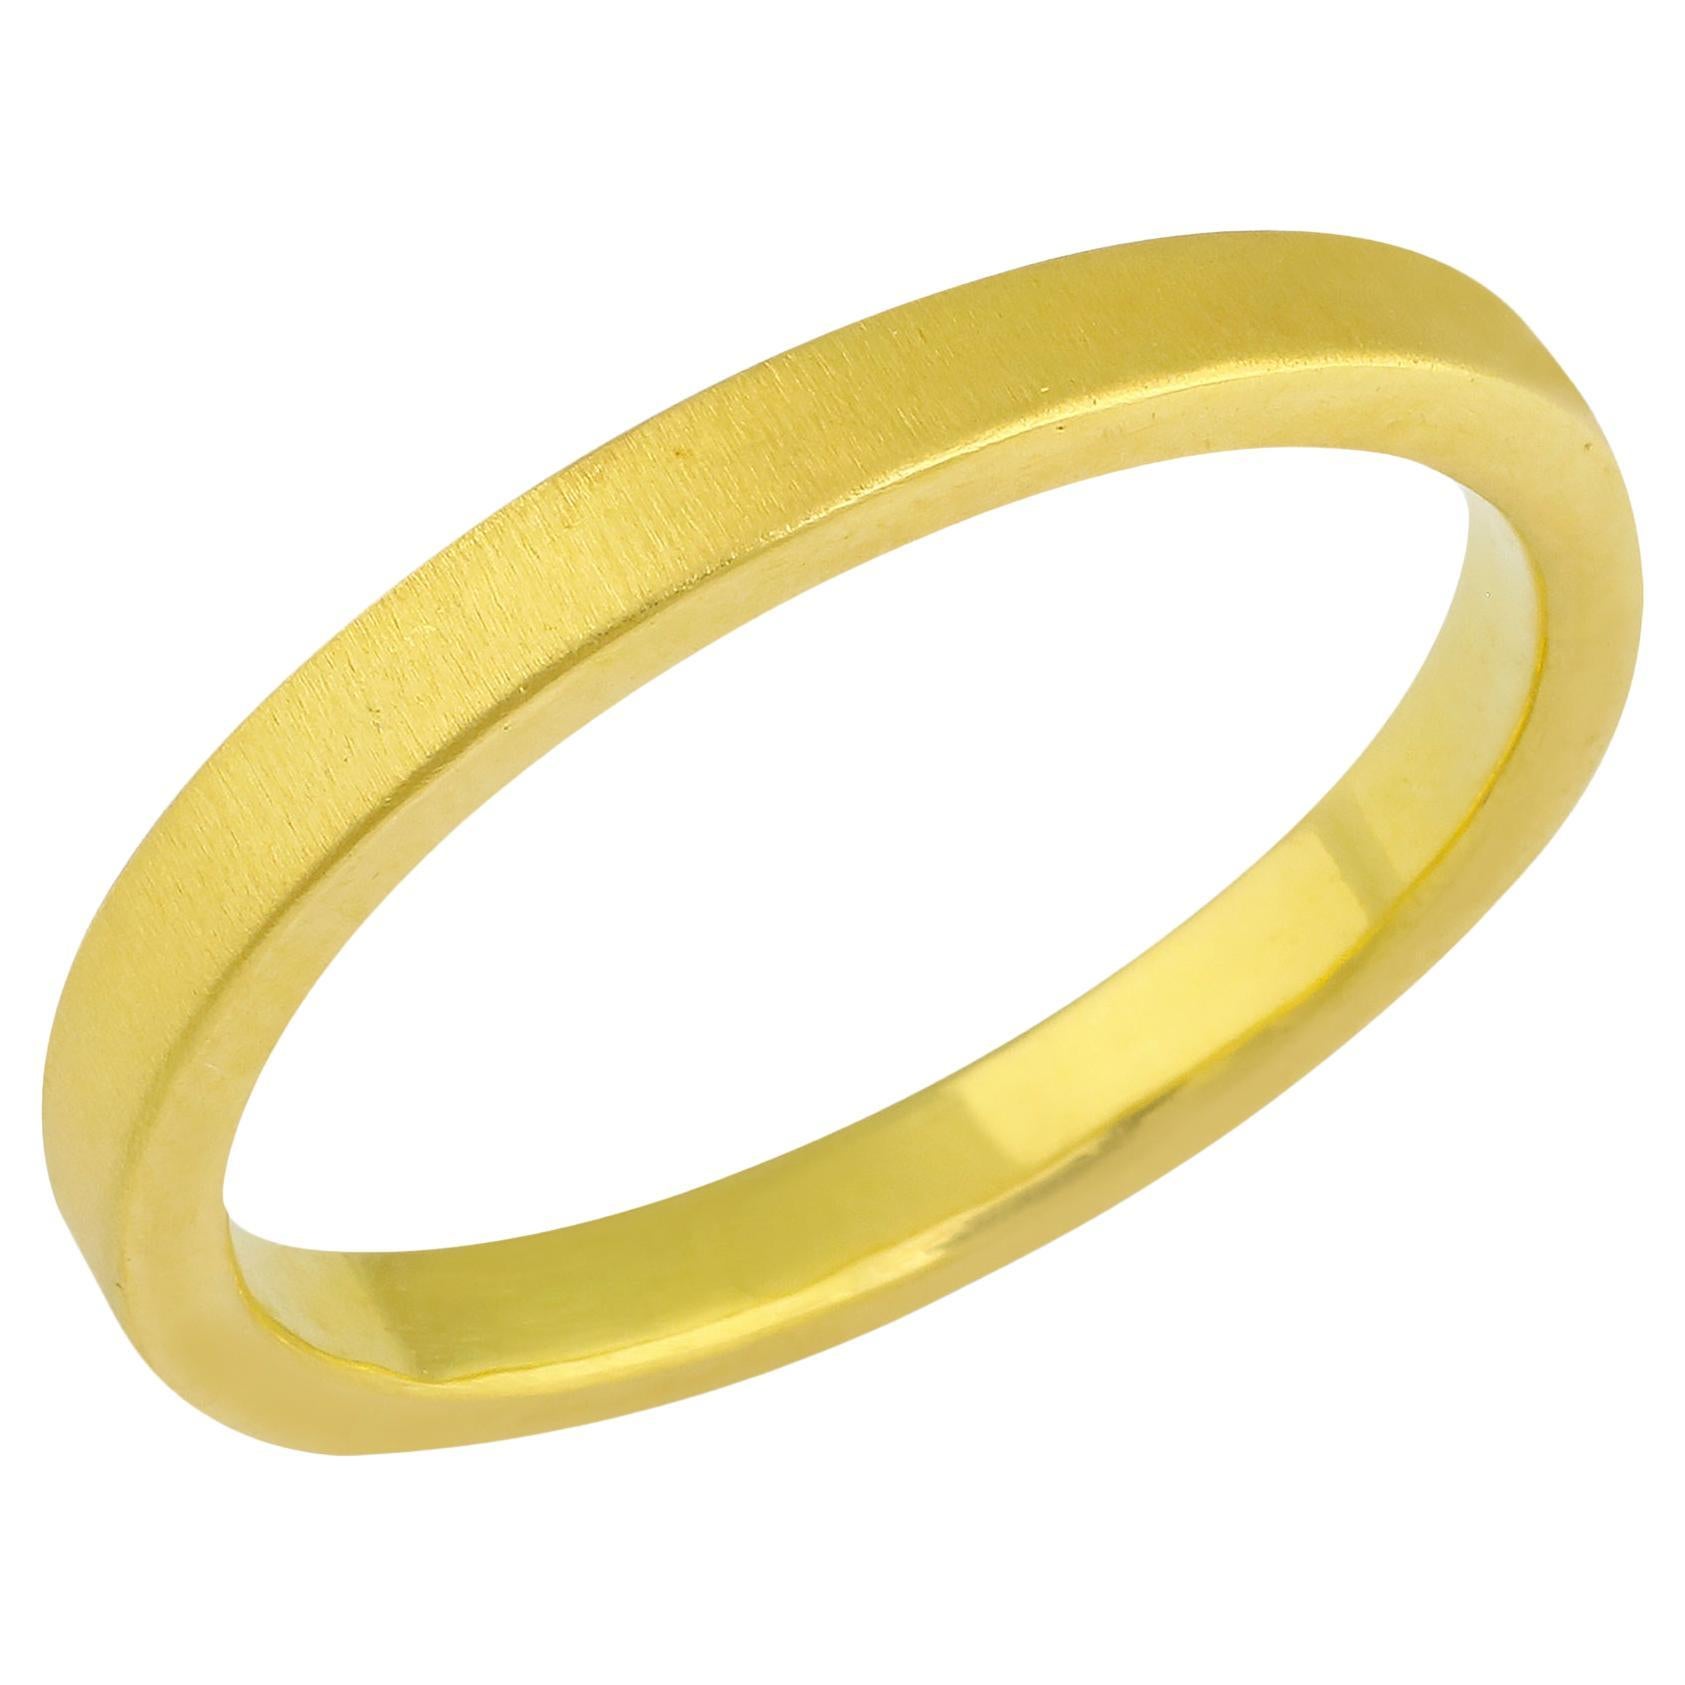 PHILIPPE SPENCER Massiv 20K Gold Hand & Anvil geschmiedetes 2,75 mm x 2 mm Band